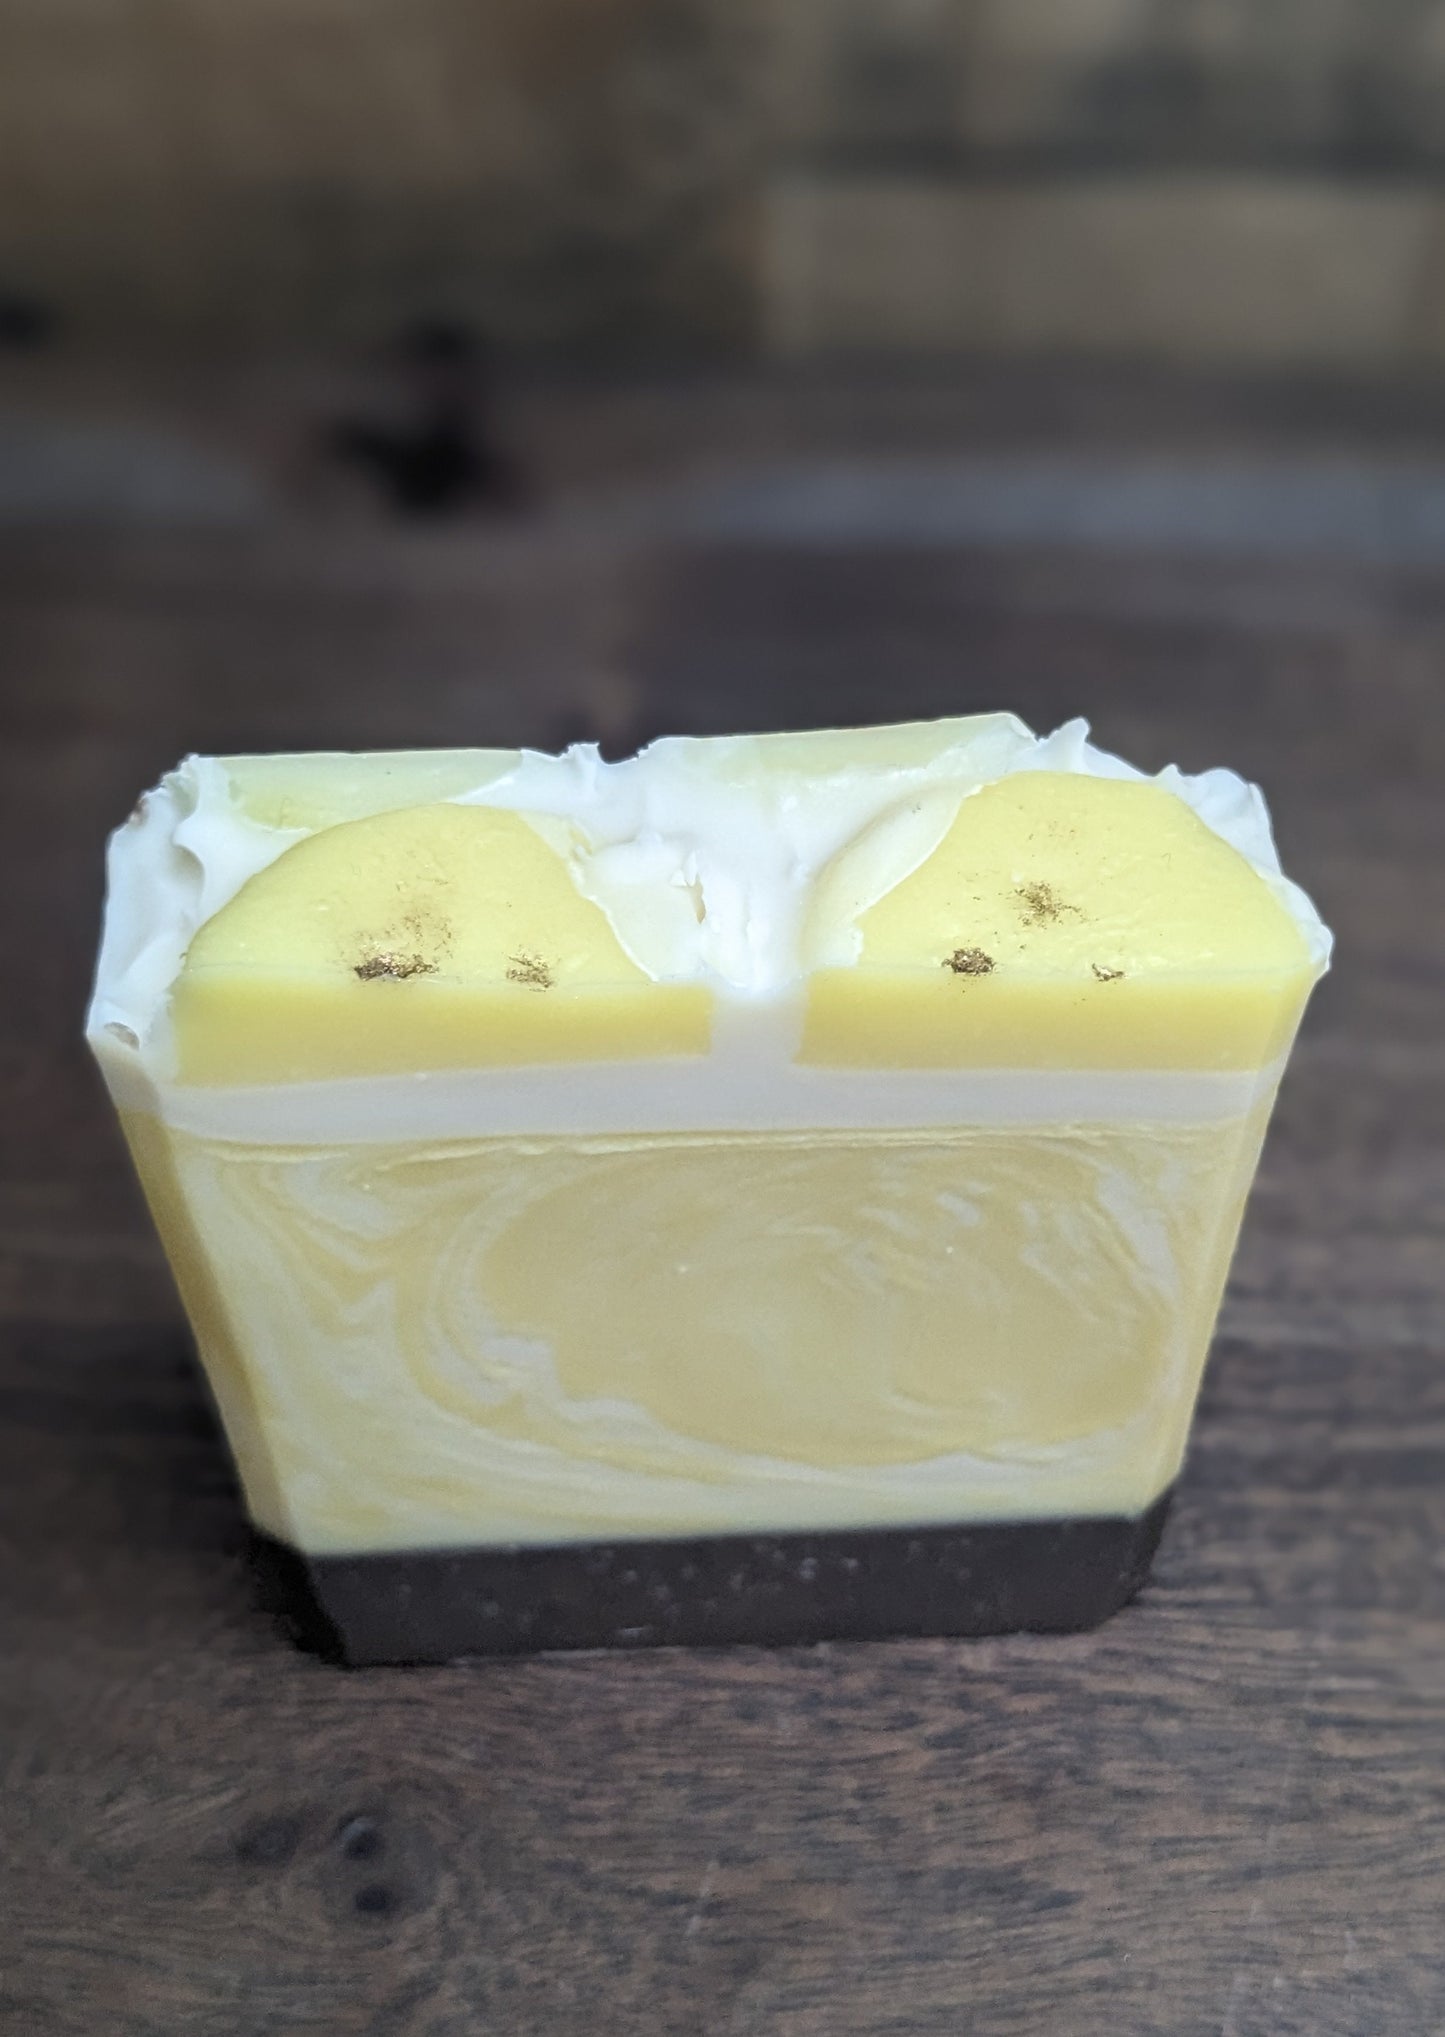 A bar of soap that looks like a slice of banana cream pie